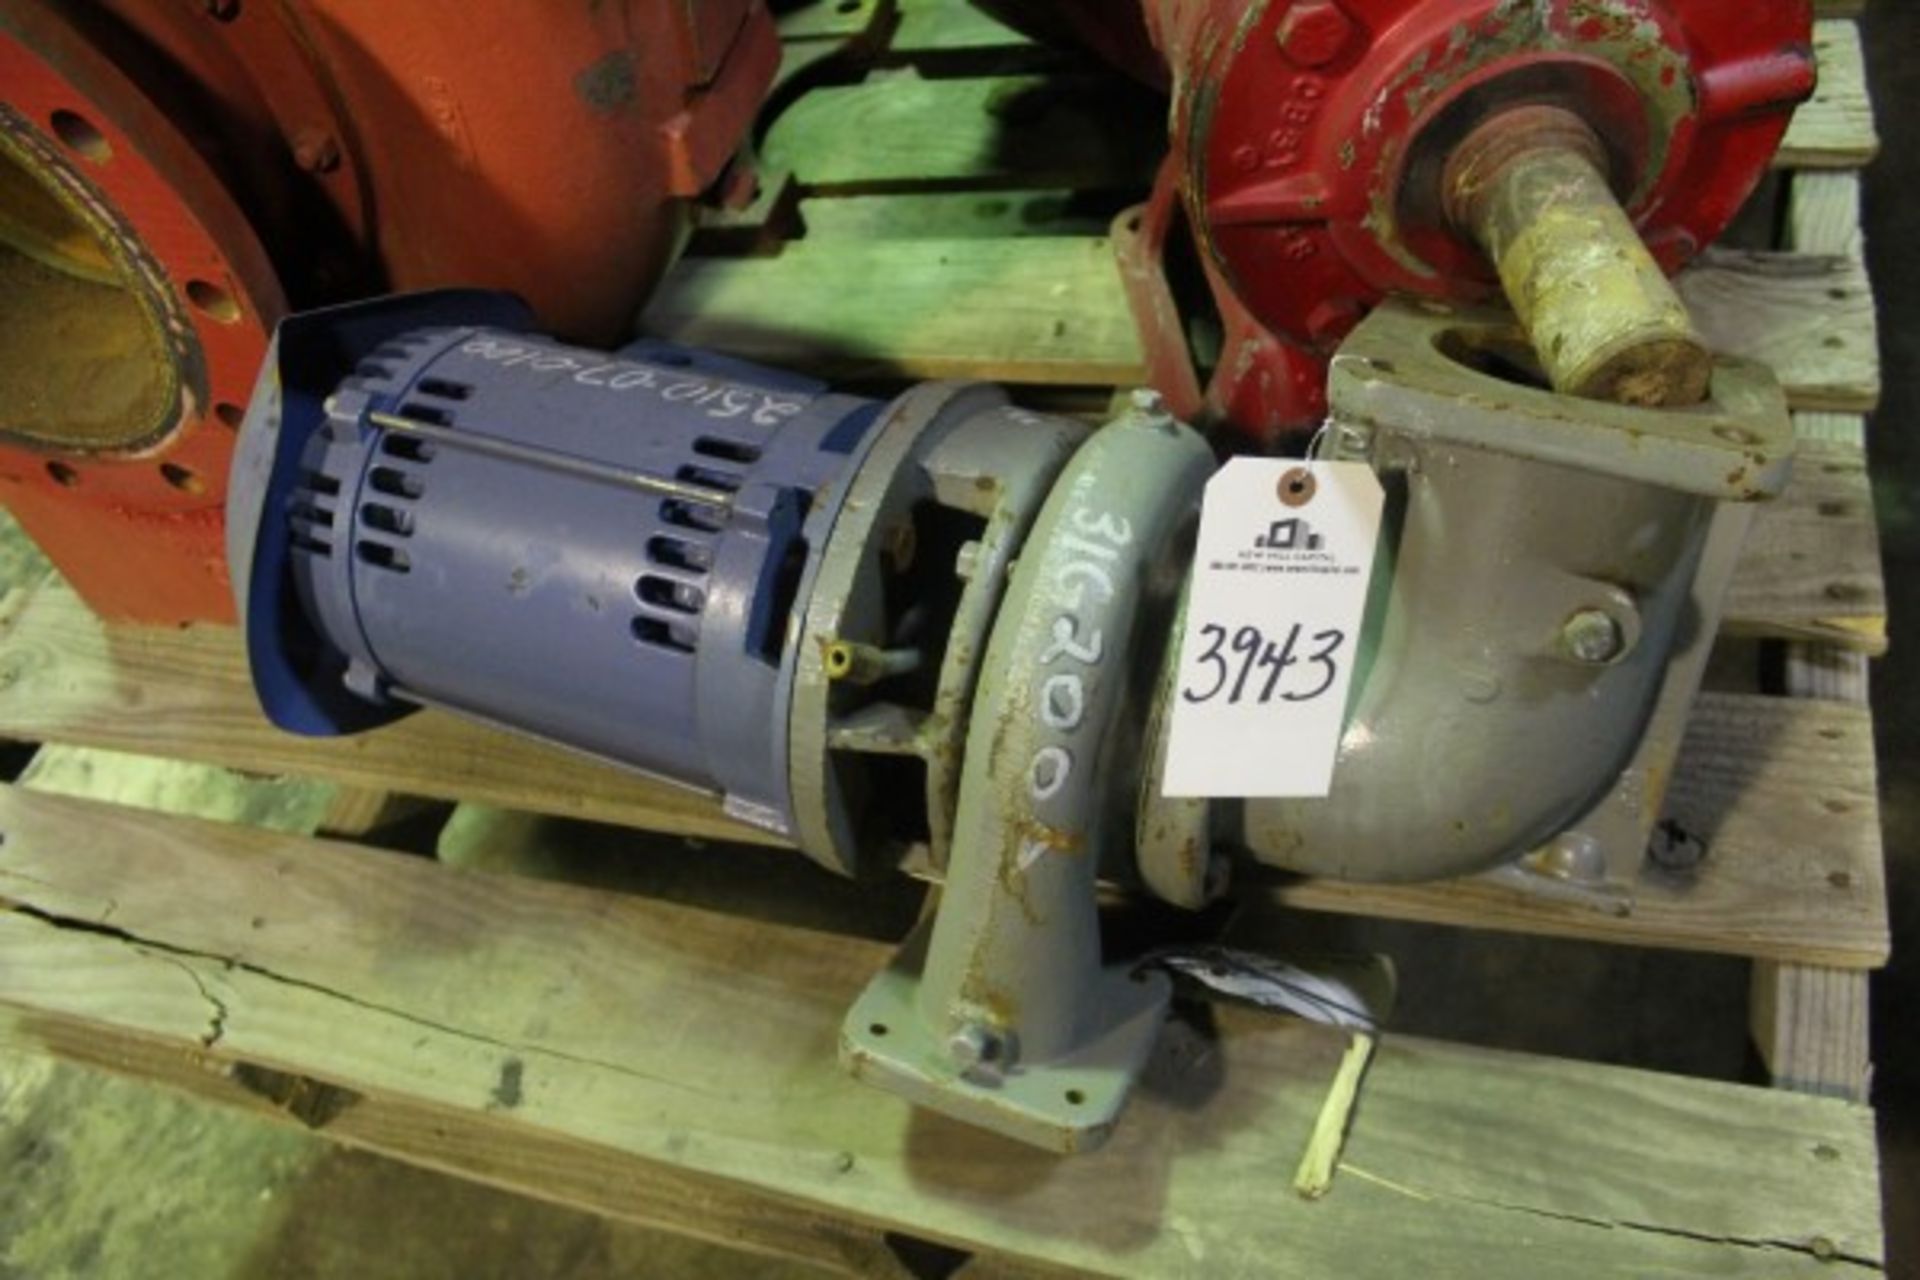 Bell & Gossett 614B Pump | Seller to load for $10 per lot or buyers may remove hand carry items by